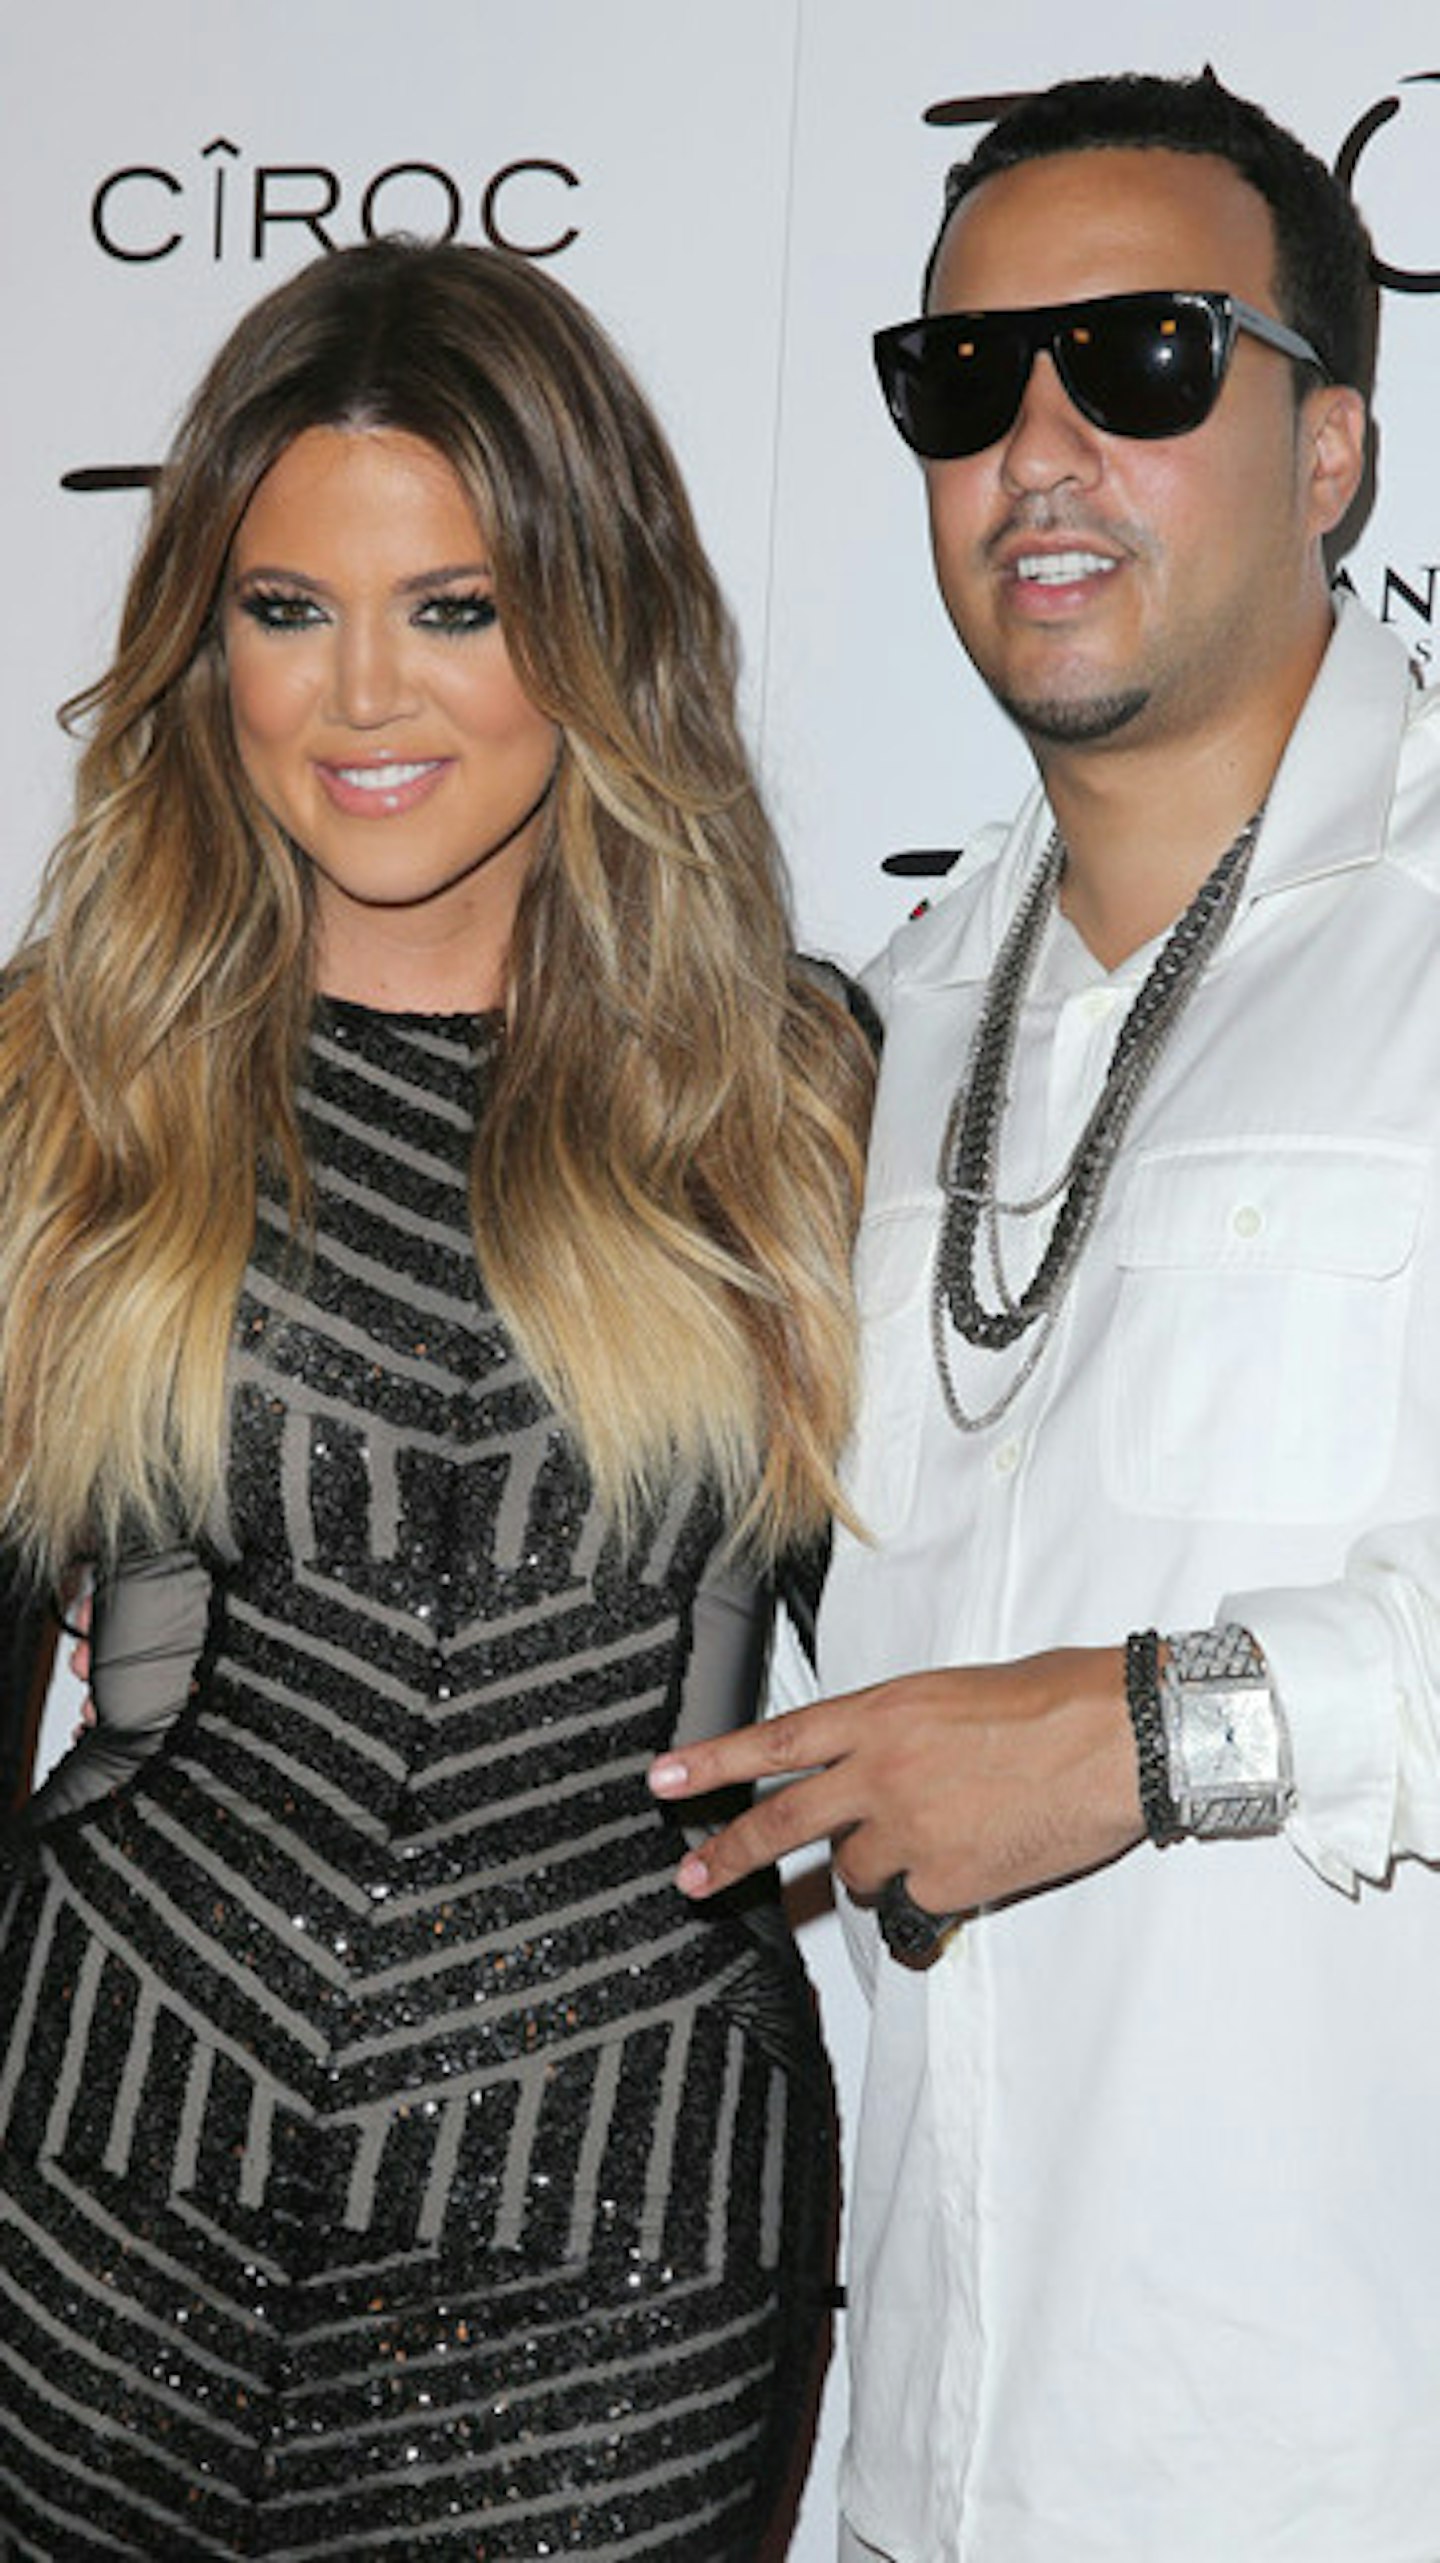 Khloe and French started dating earlier this year